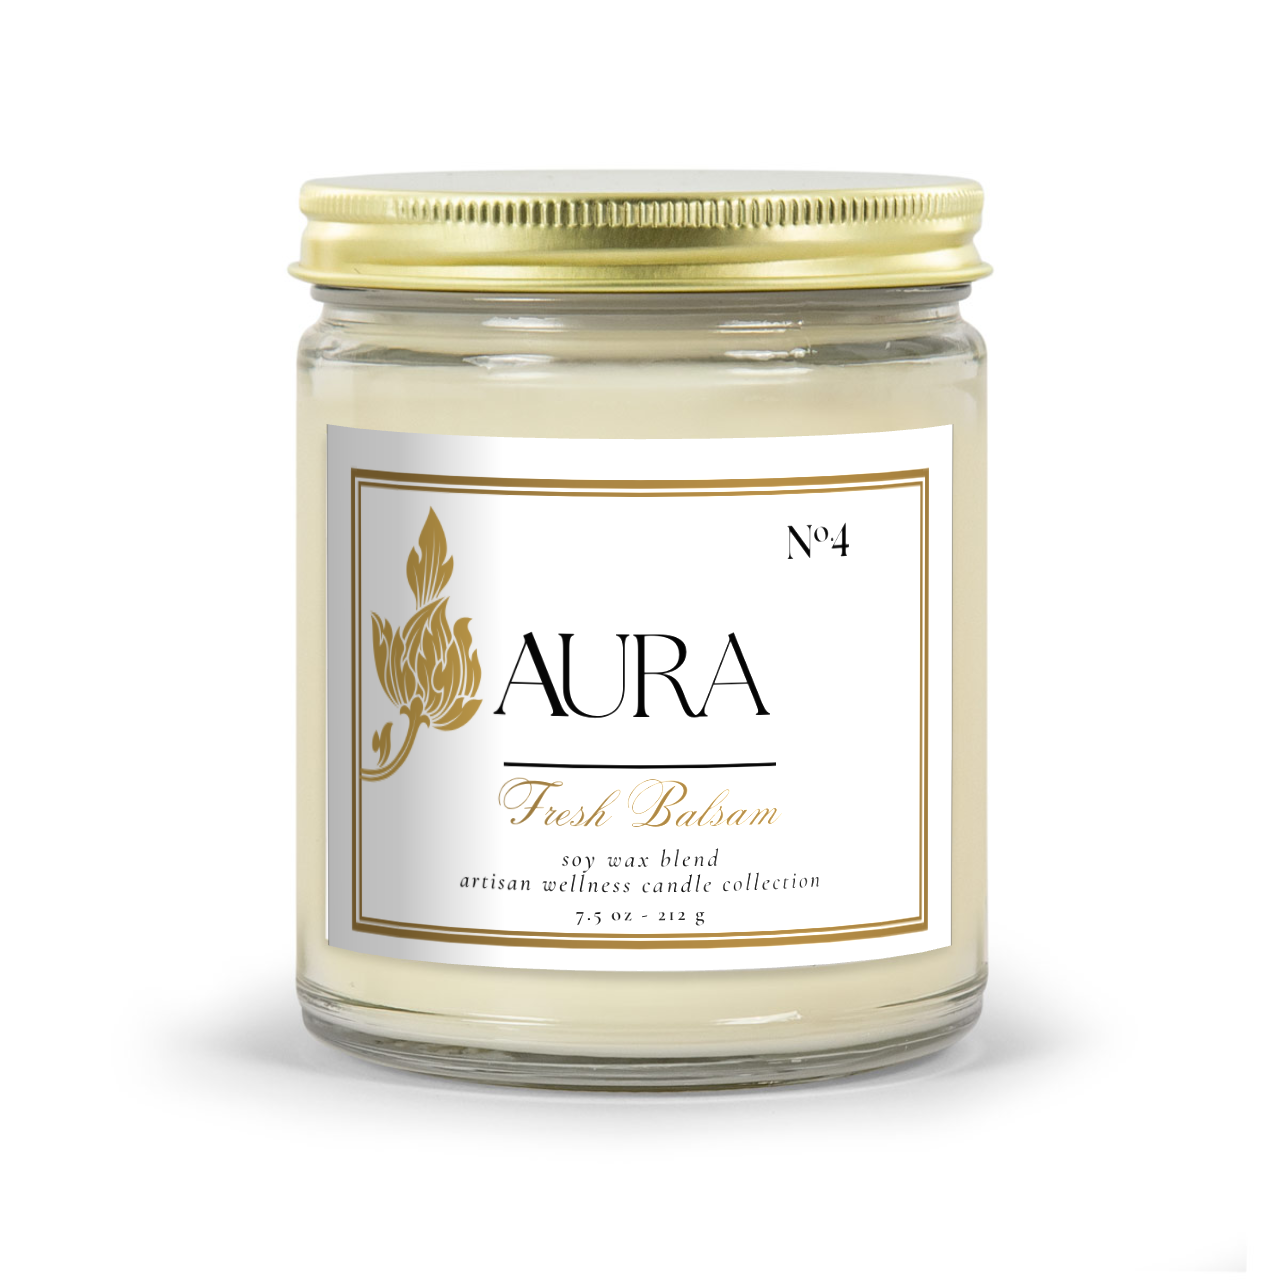 Aromatherapy Candle - Aura Aromas Artisan Wellness Candle Collection: Classic Amber Or Classic Clear Vessel Fresh Balsam Scent